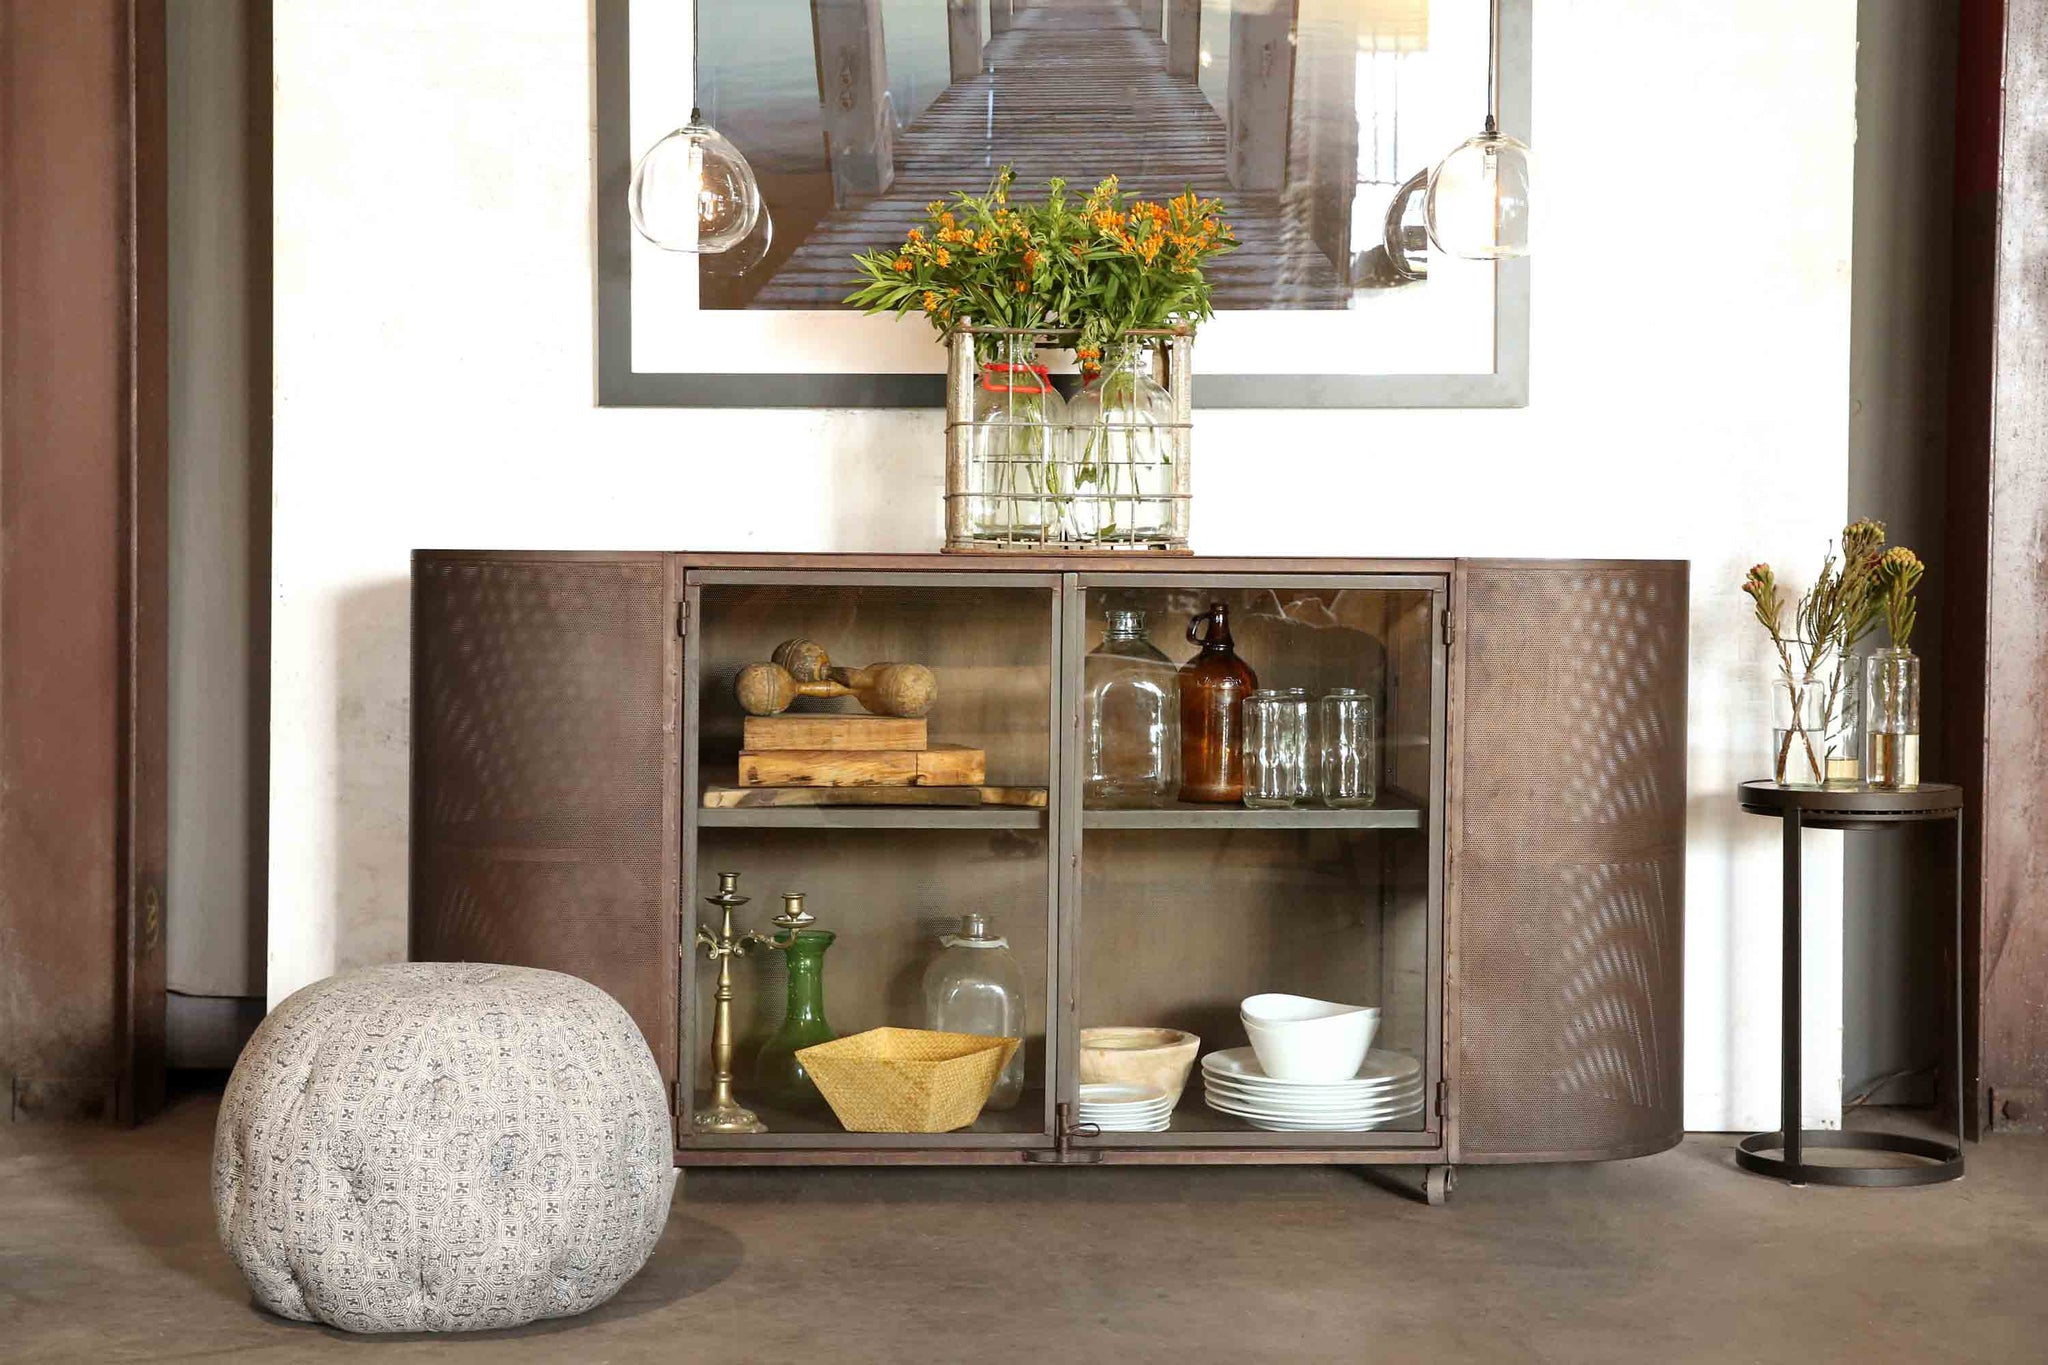  Oval issaac credenza with two teardrop pendants in clear hanging above. Rotor side table beside the issaac credenza and a pouf ottoman in printed fabric. 